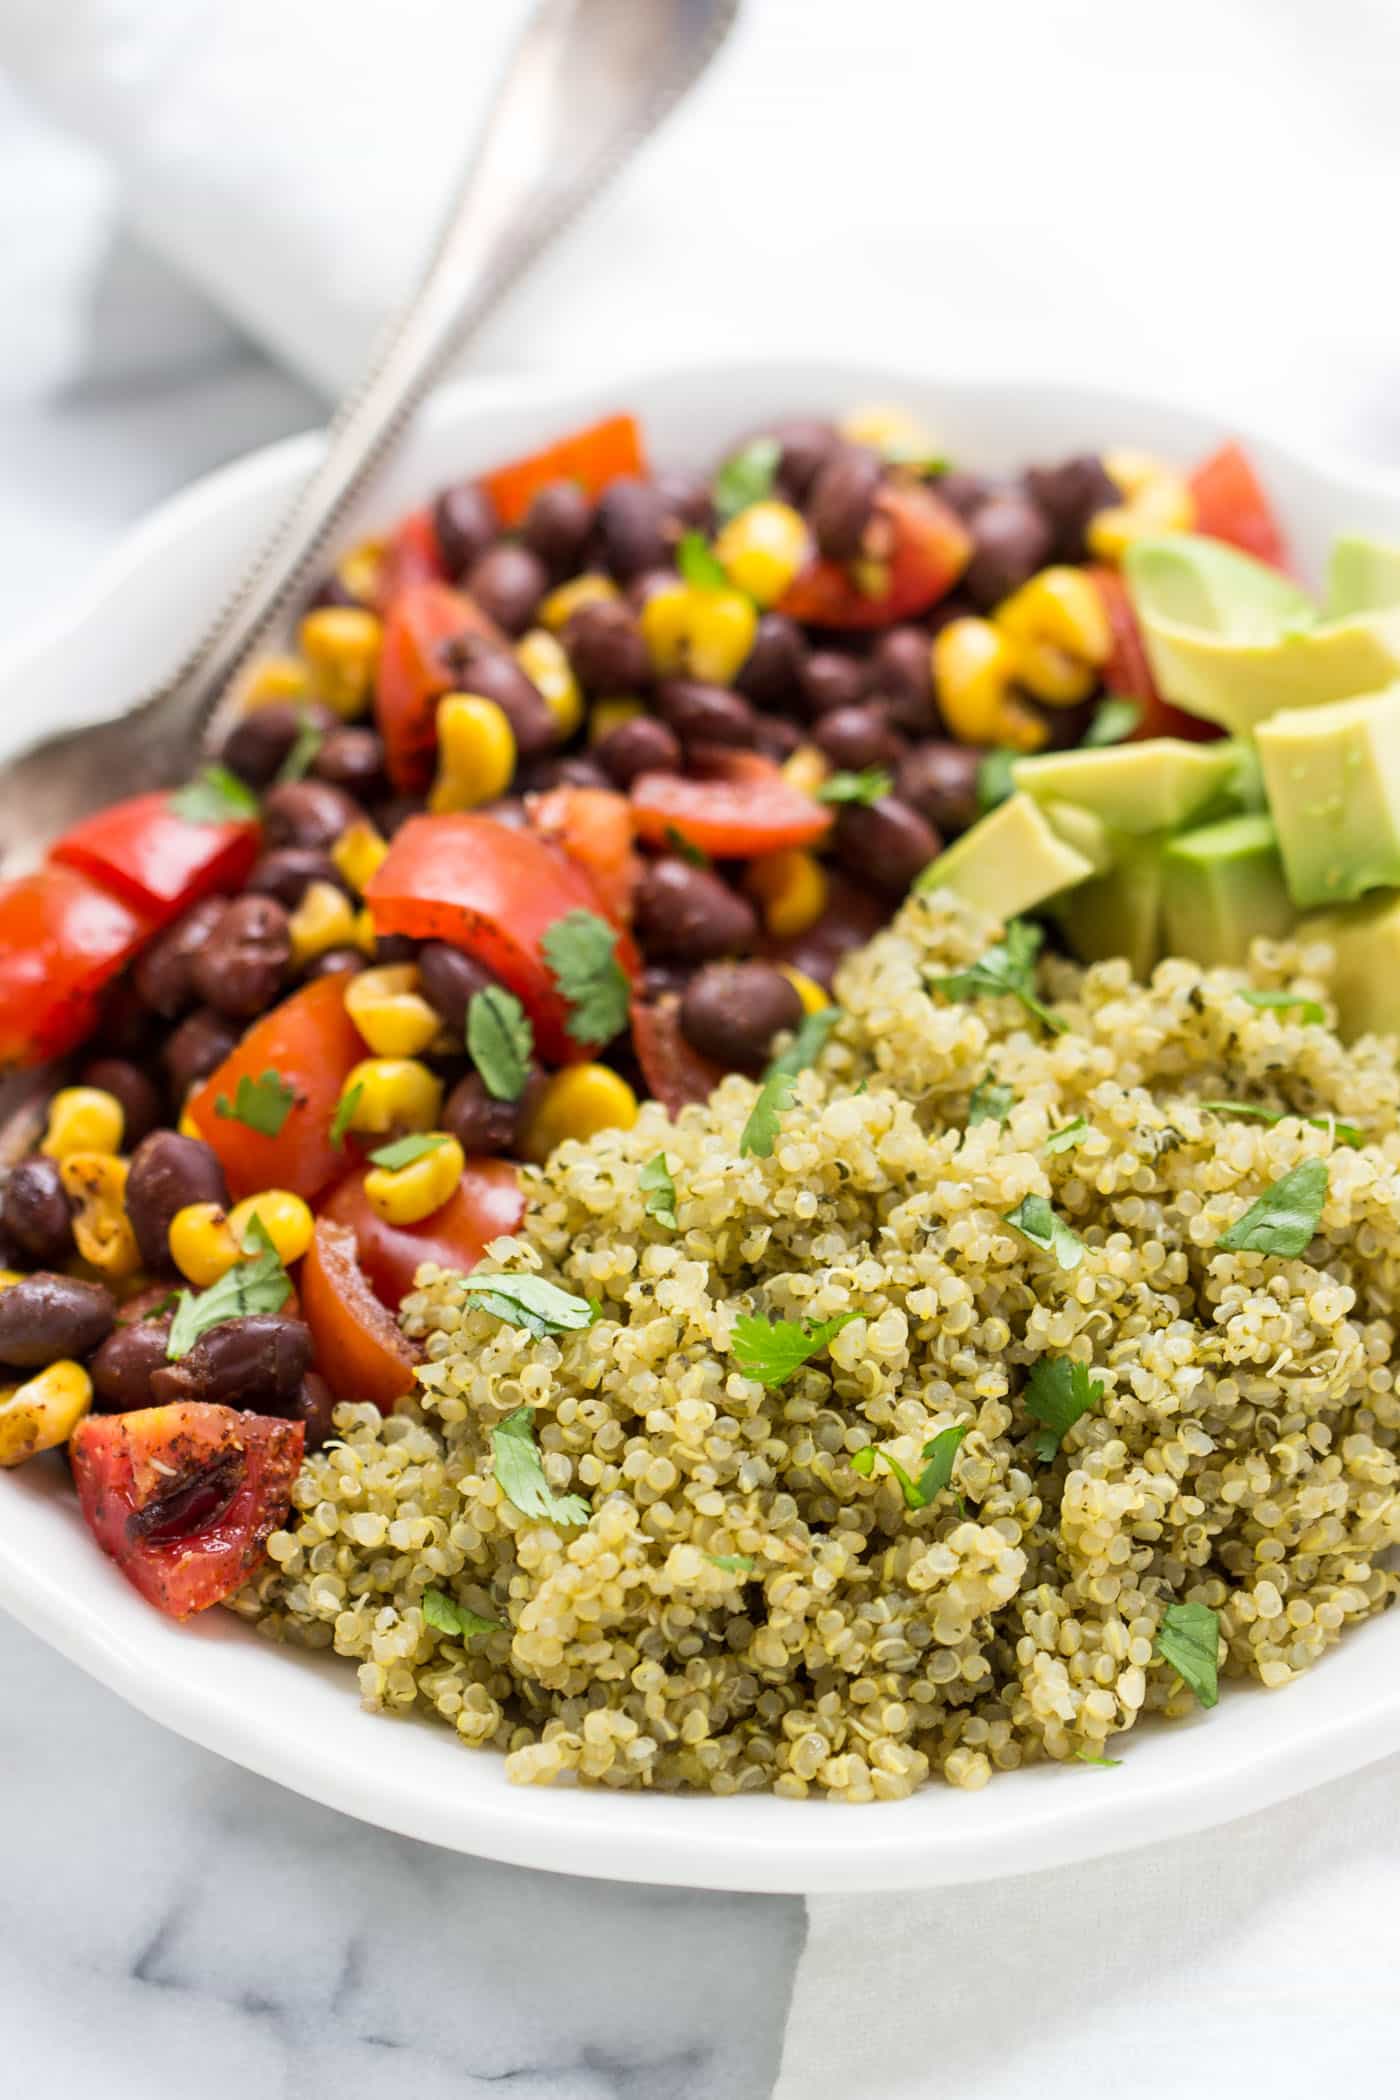 Spicy Green Mexican Quinoa -- light, fluffy and full of flavor! (served with a tasty black bean salad)